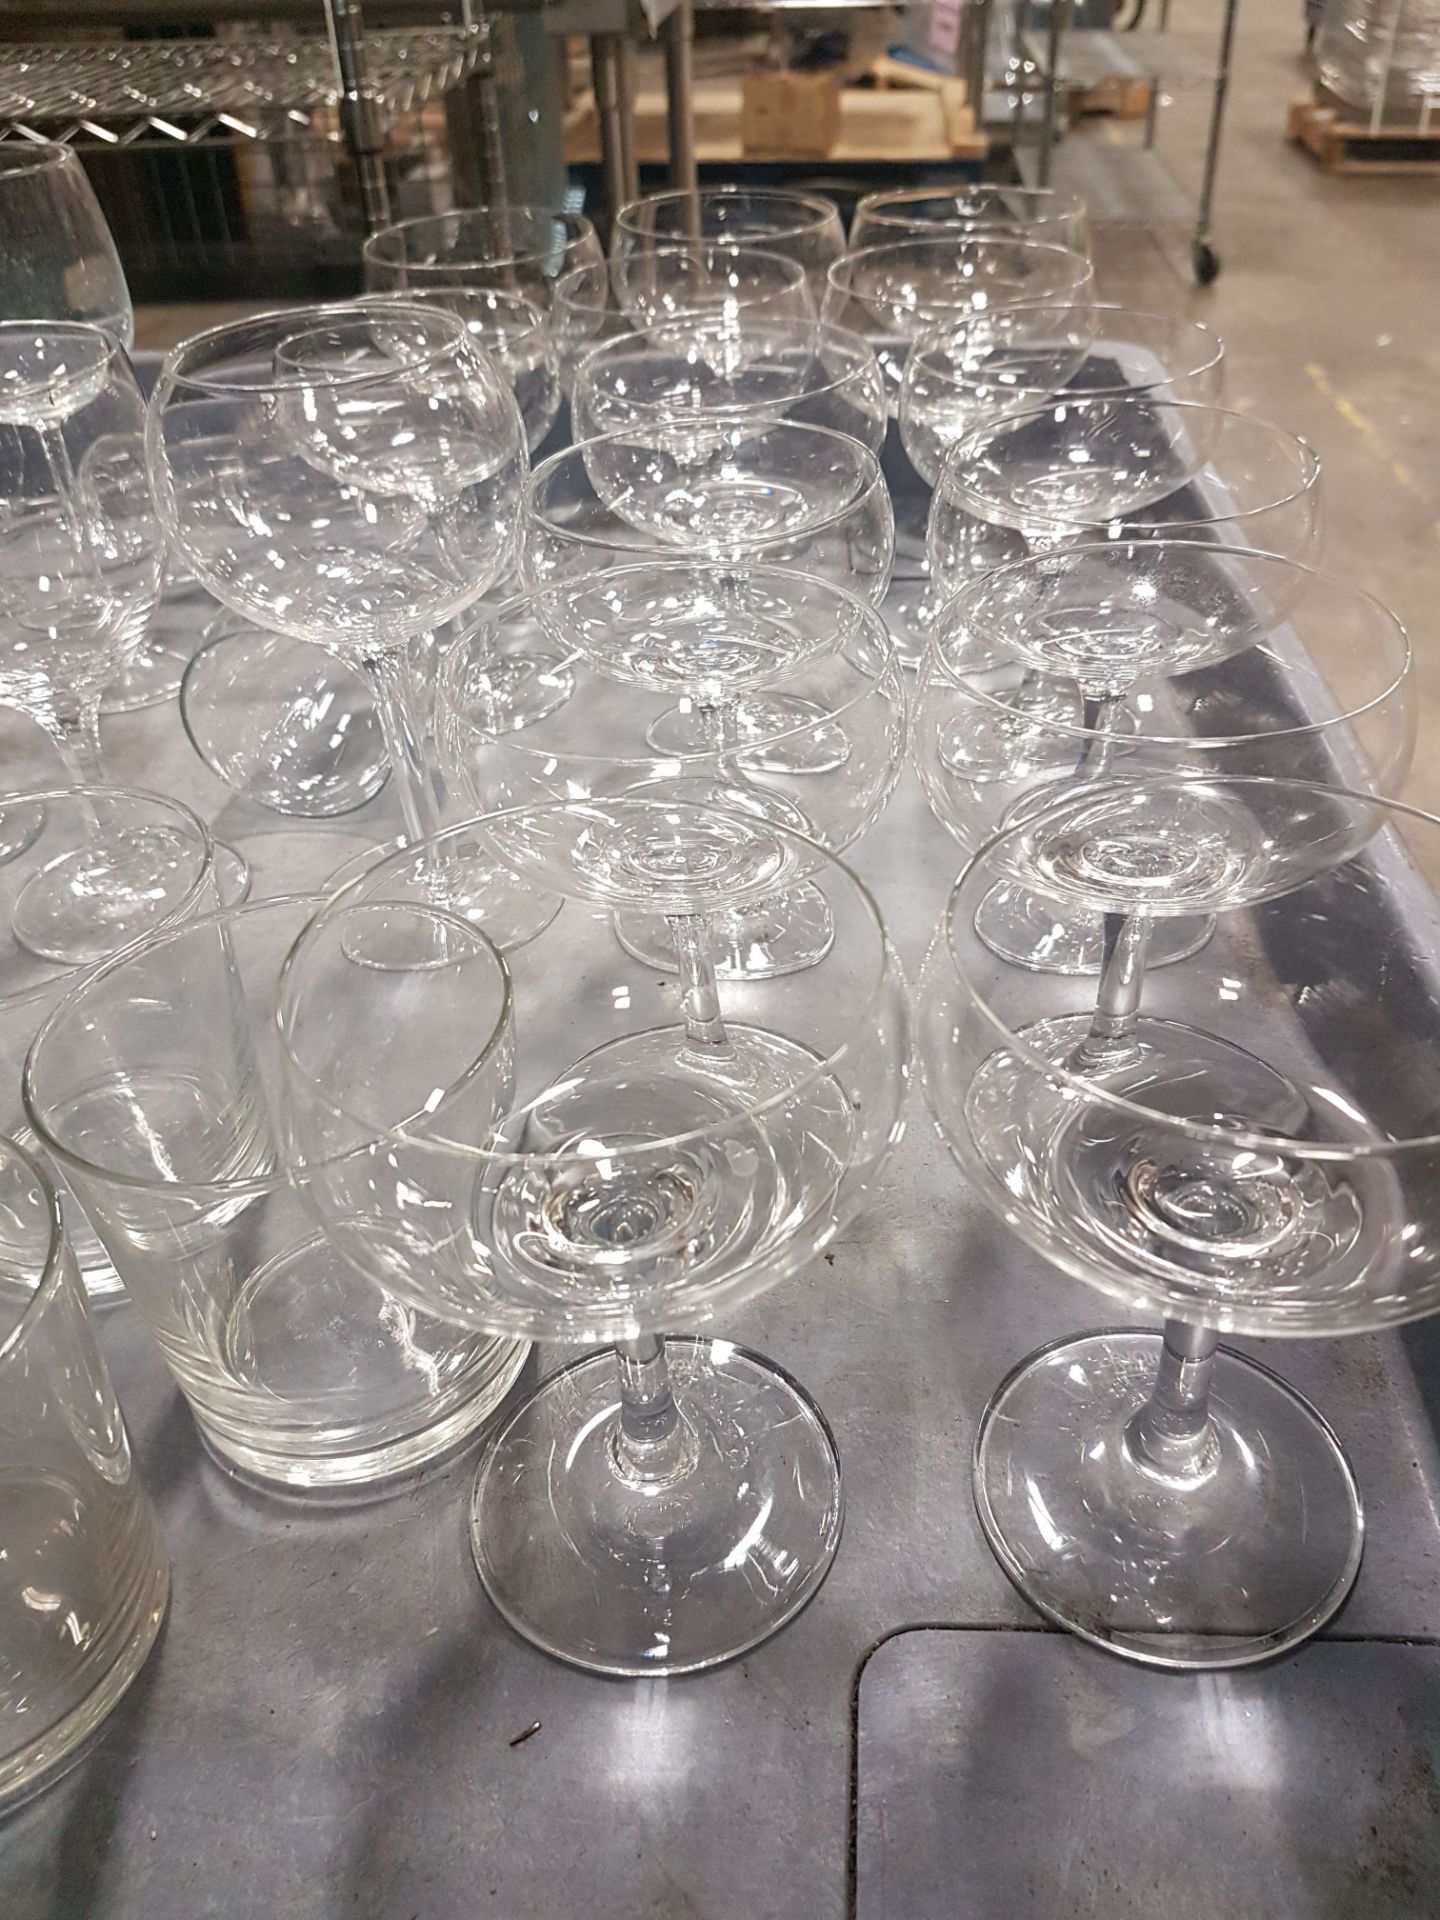 Assorted Glassware - Approx. 50 Pieces - 1 Lot - Image 2 of 4